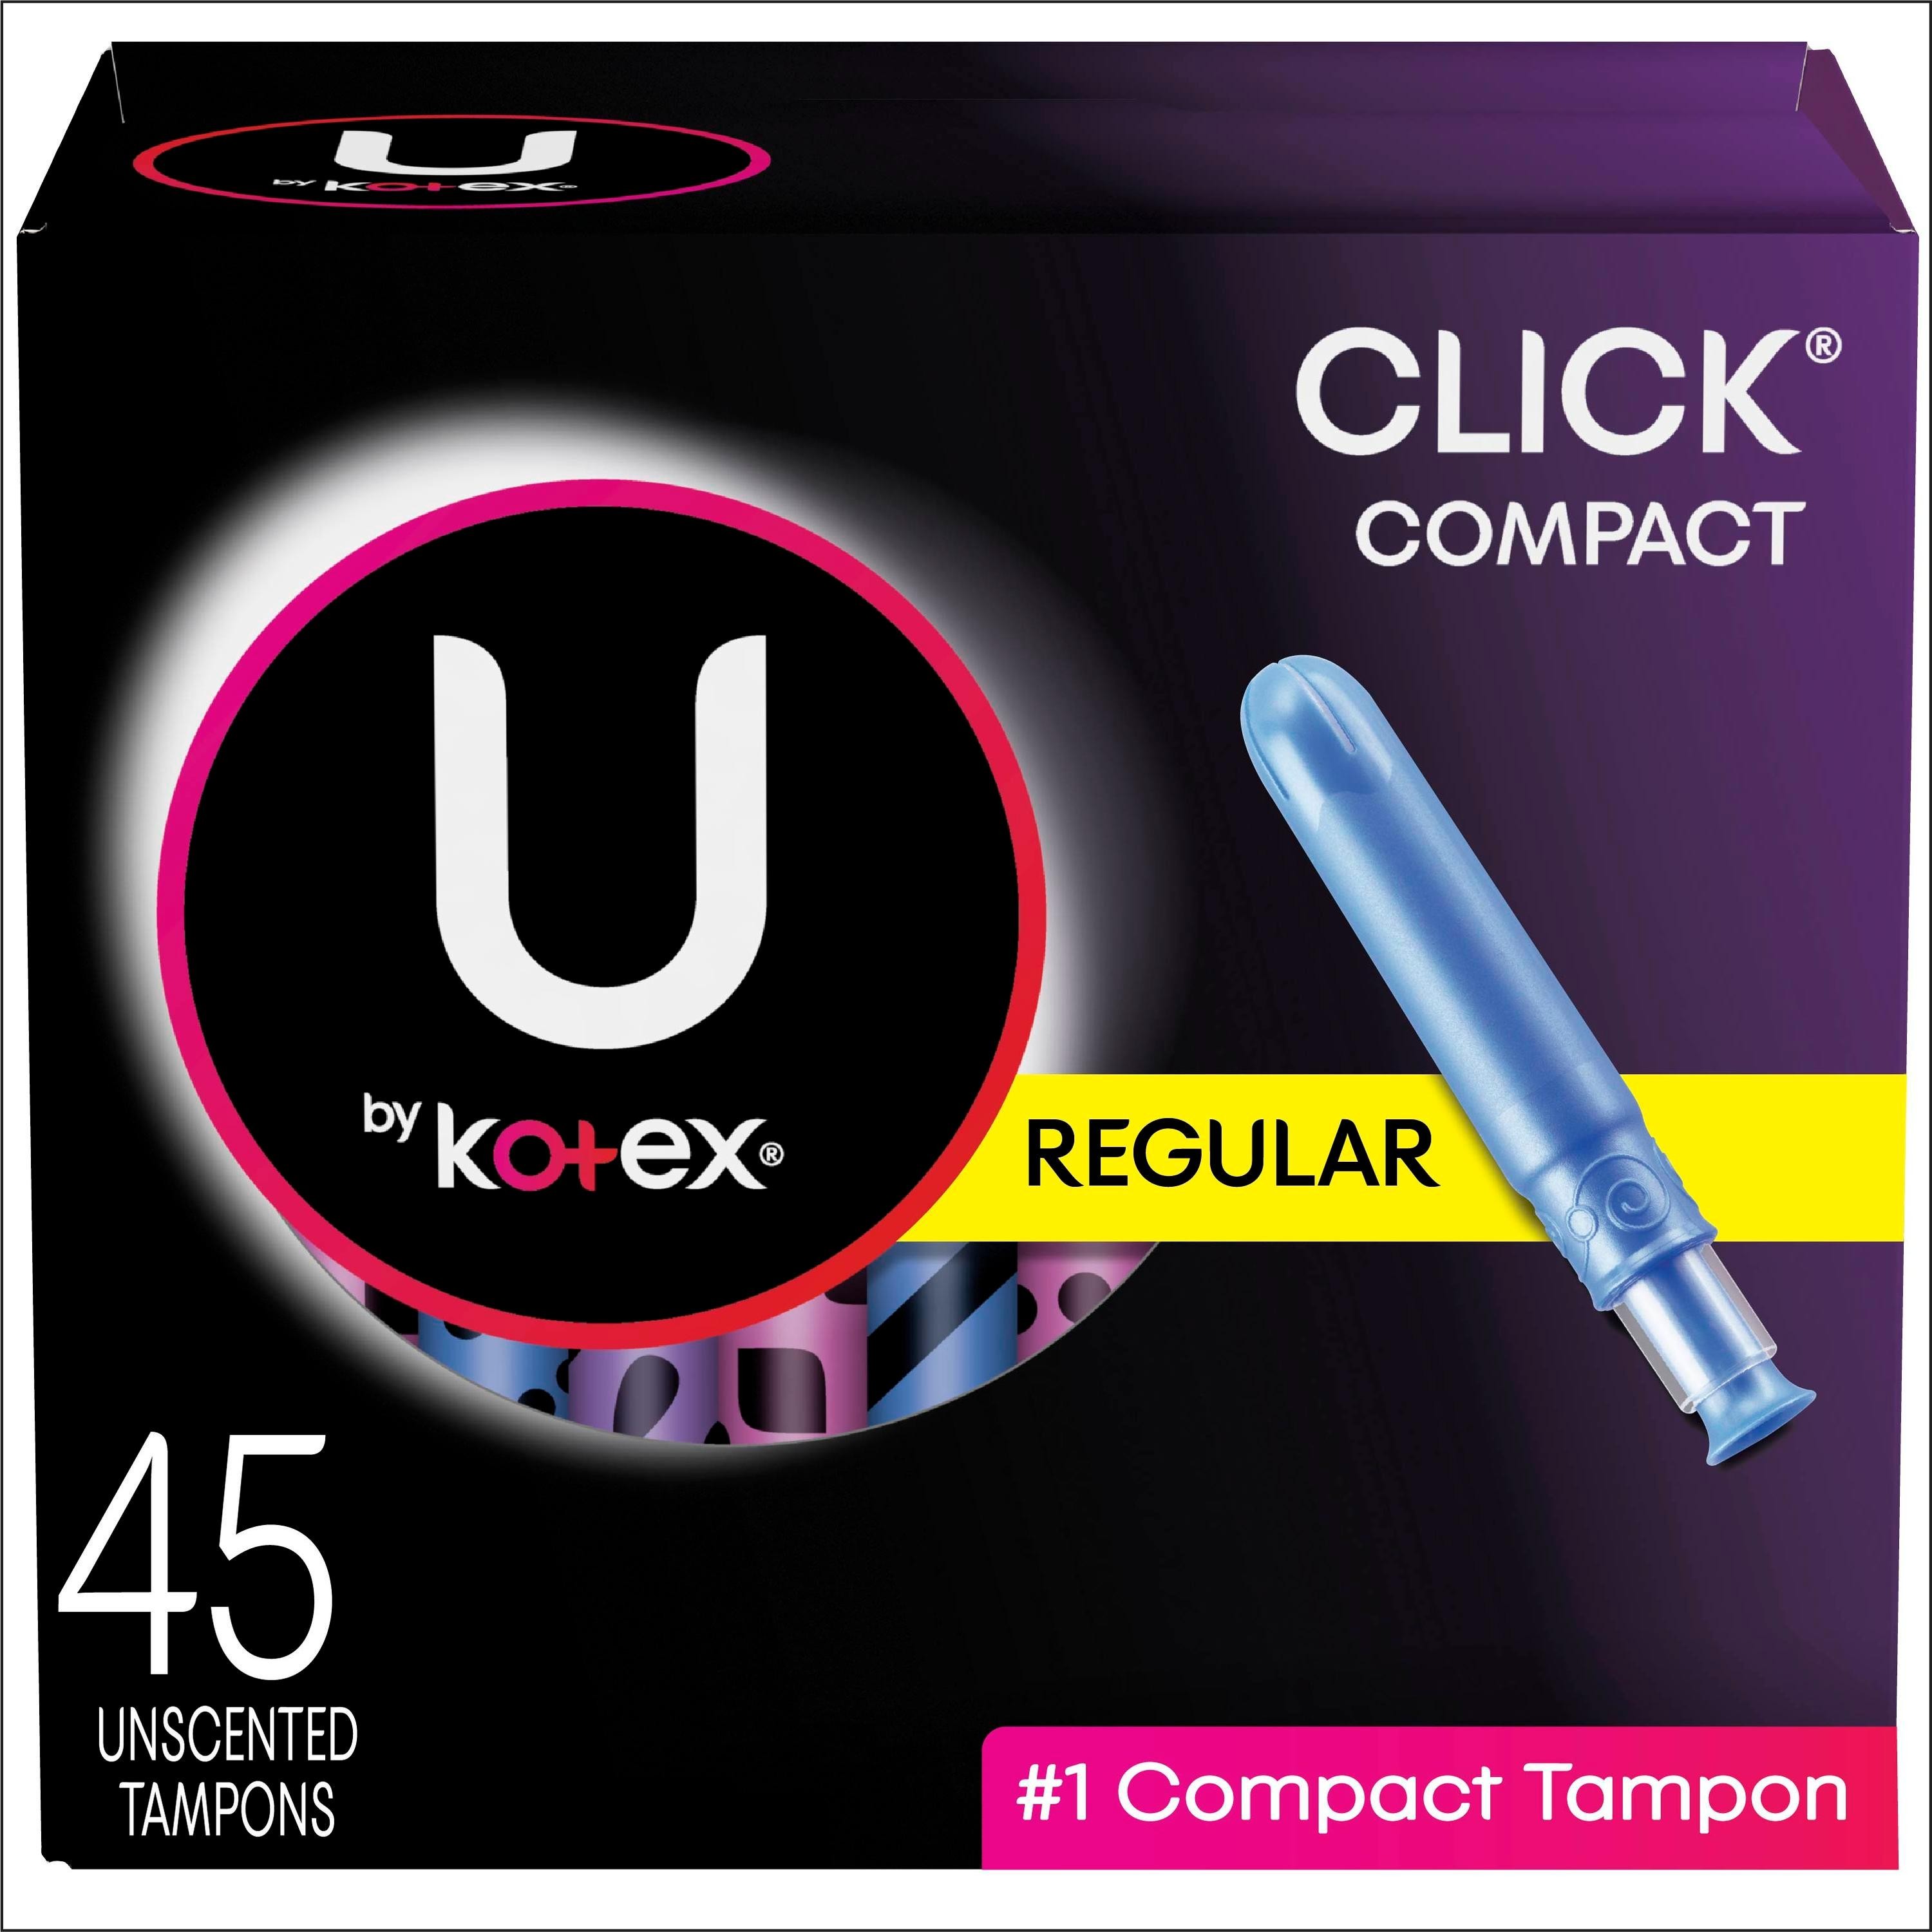 U by Kotex Click Compact Tampons Regular Unscented